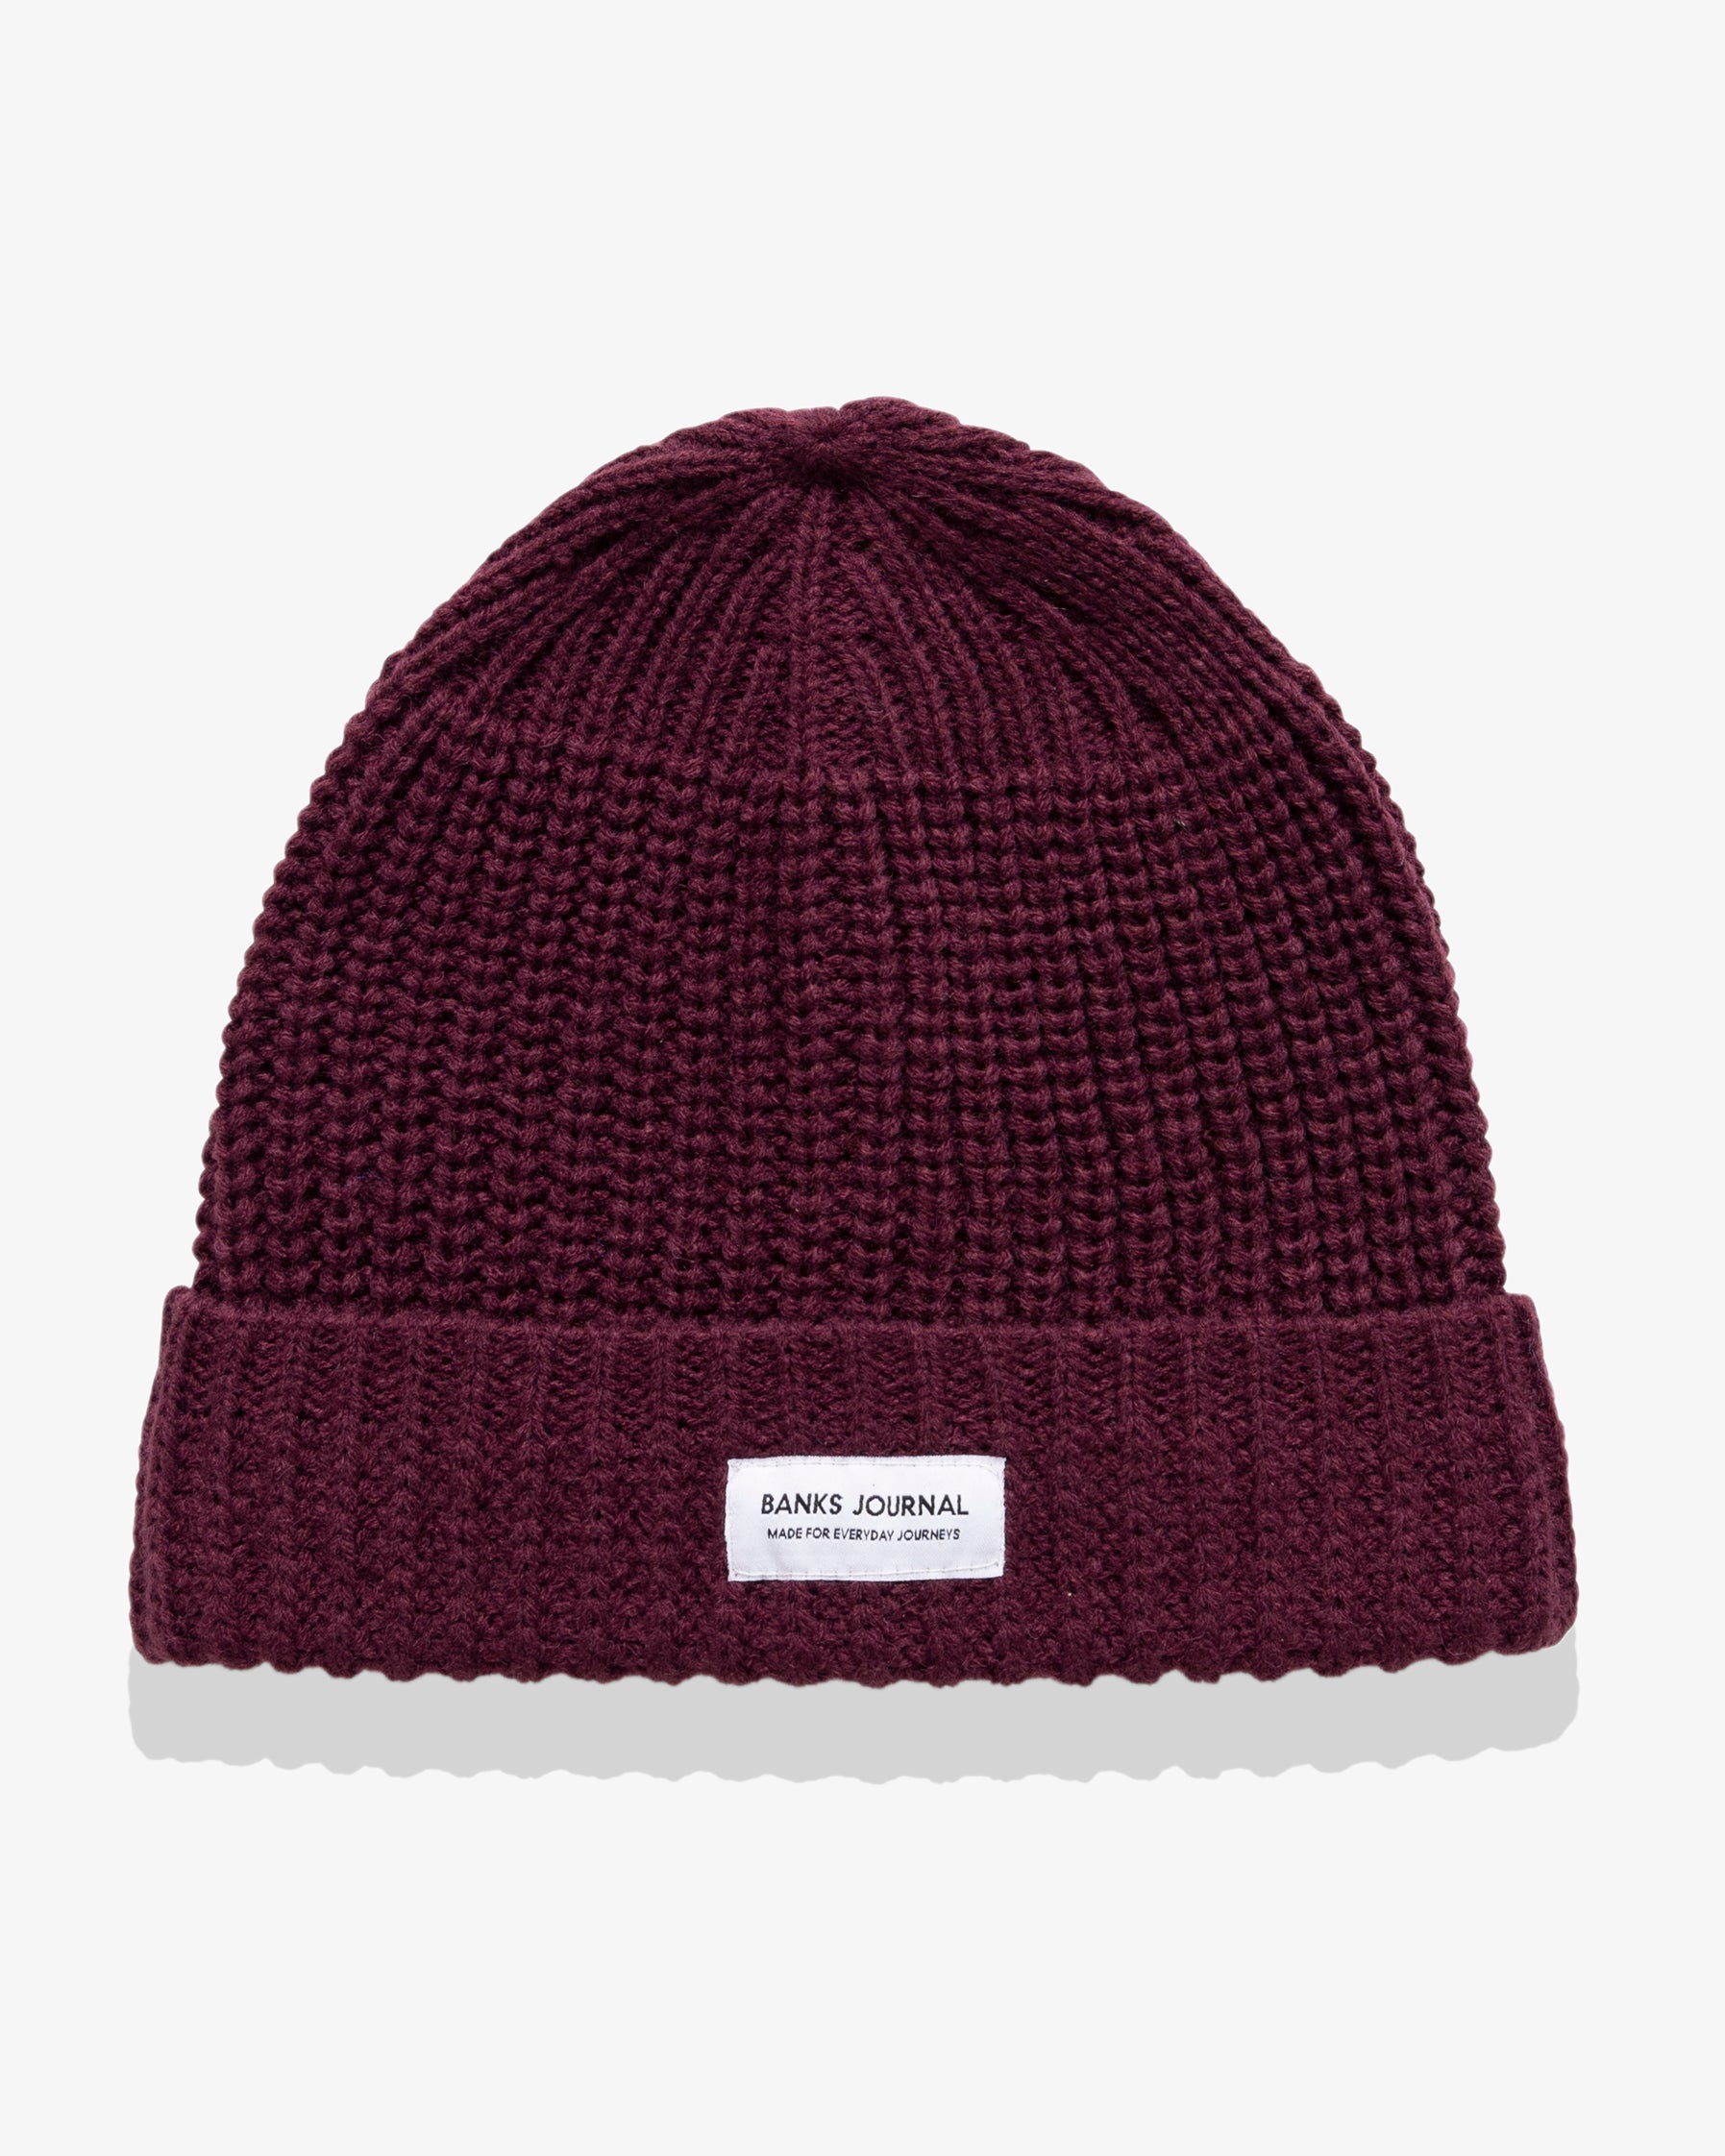 Made For Beanie